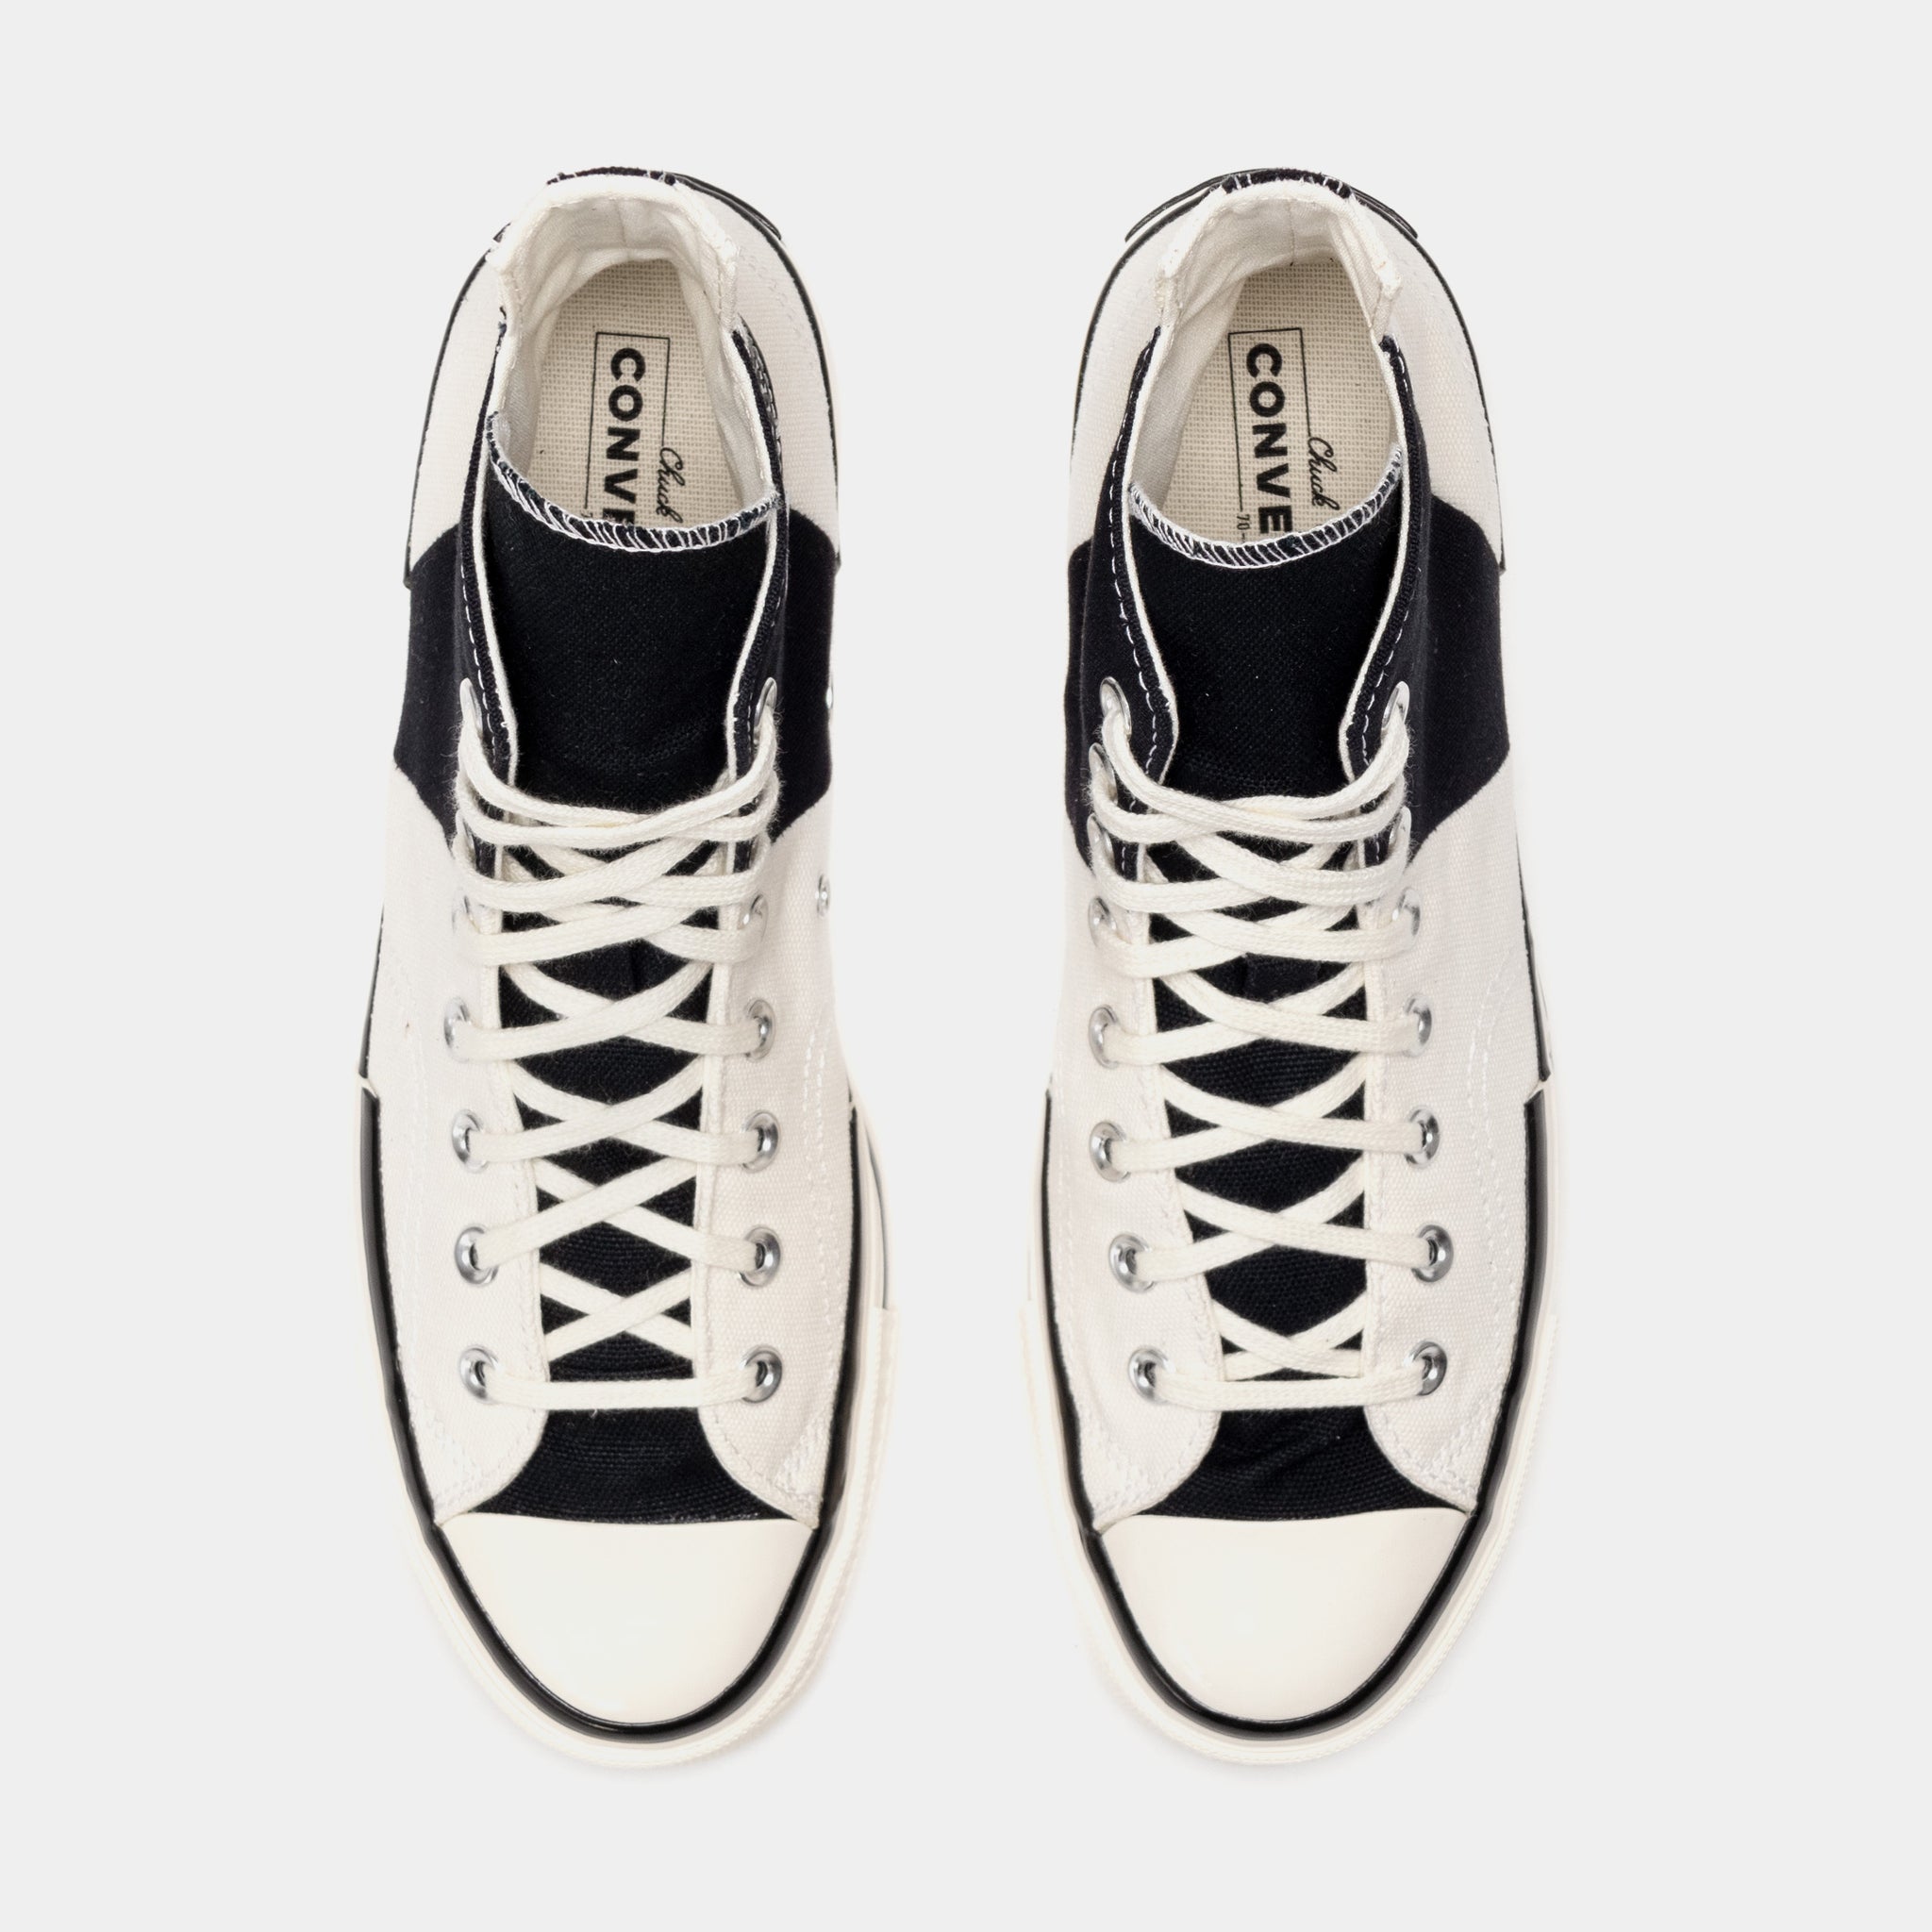 Converse: Off-White Chuck 70 Plus Sneakers